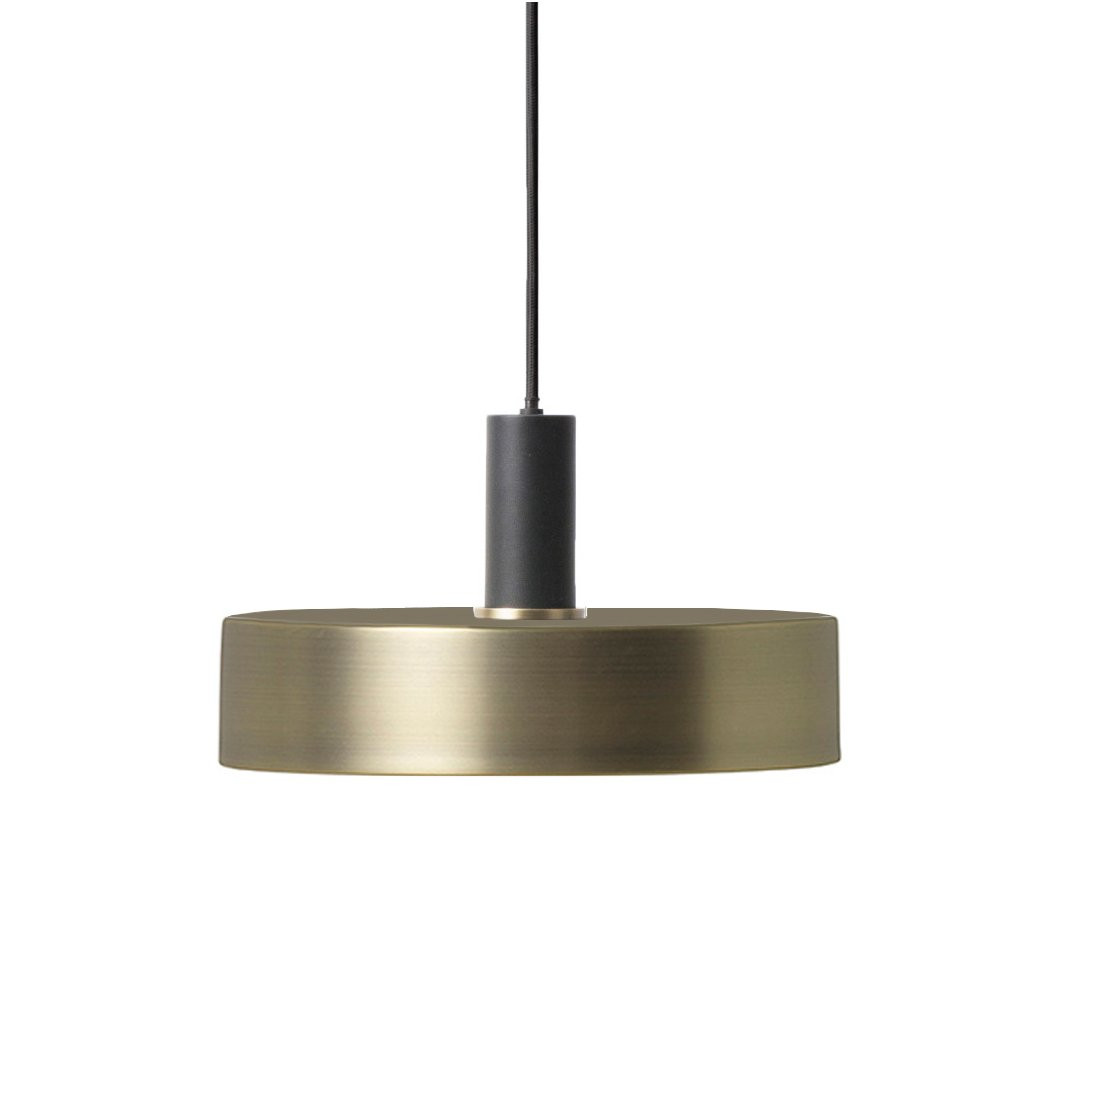 Ferm Living Collect Record Low Hanglamp Zwart Messing